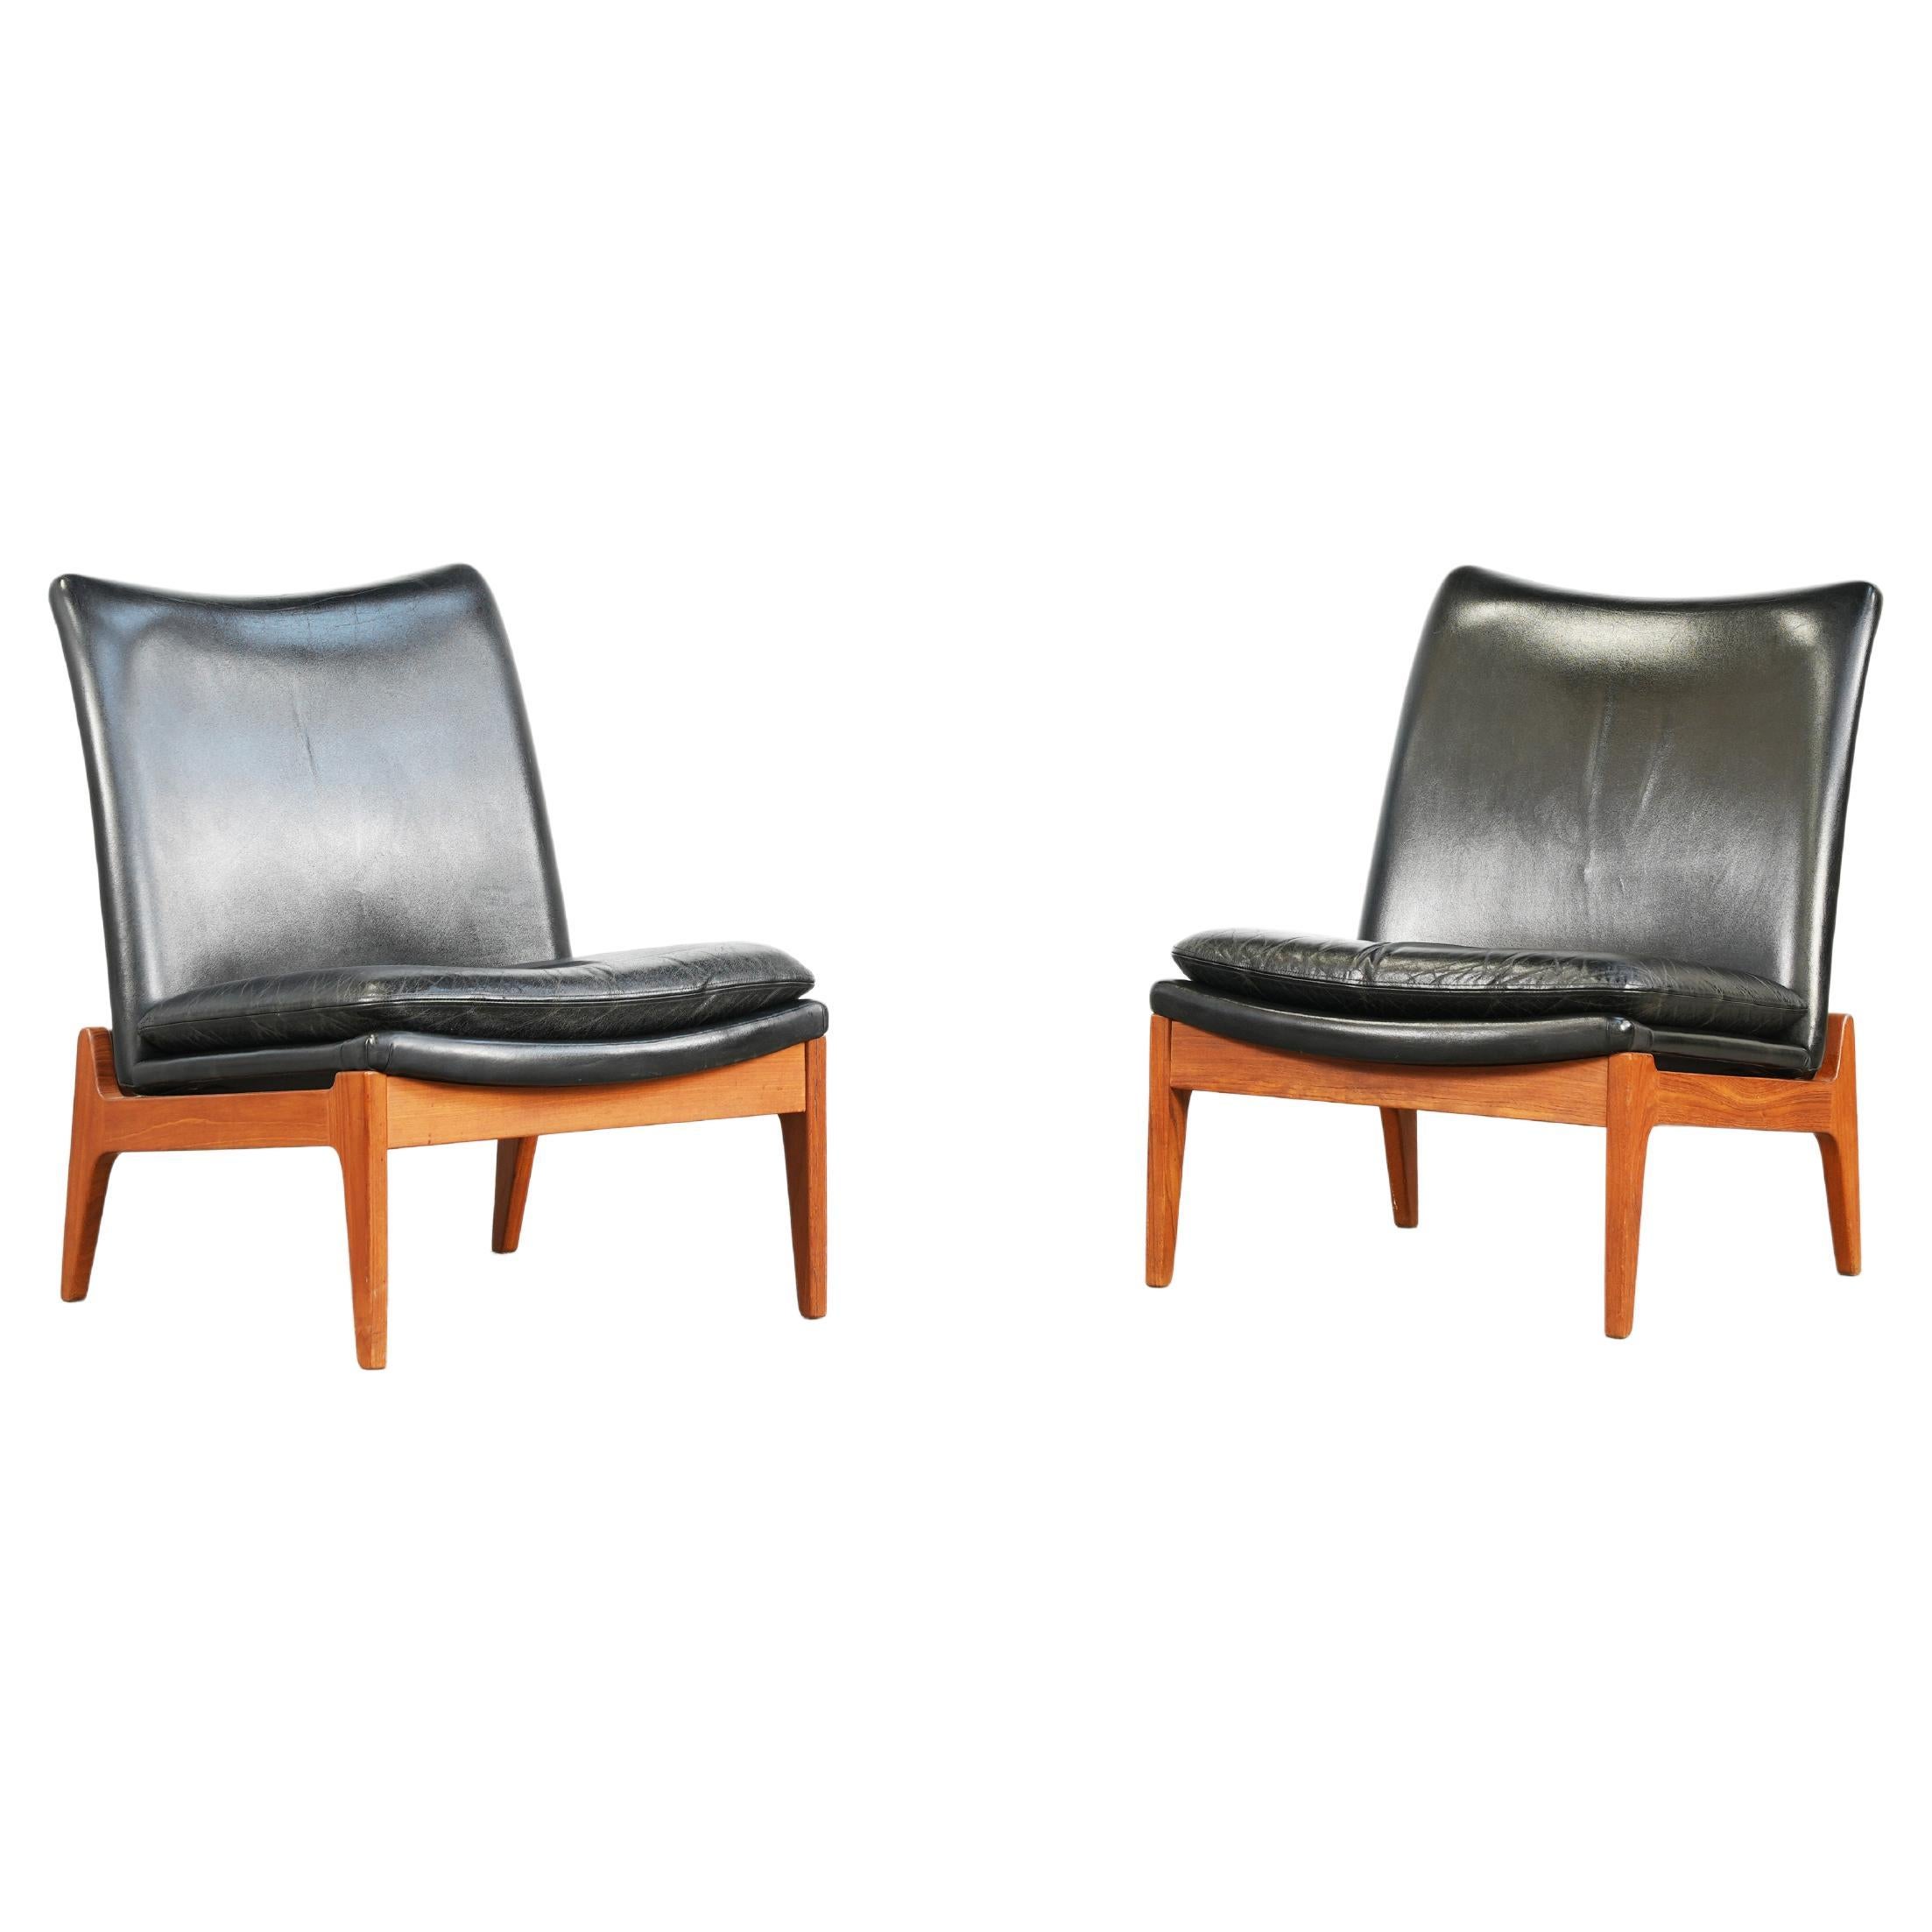 Pair of Danish Leather Lounge Chairs by Finn Juhl for France & Søn, Mod. FD112